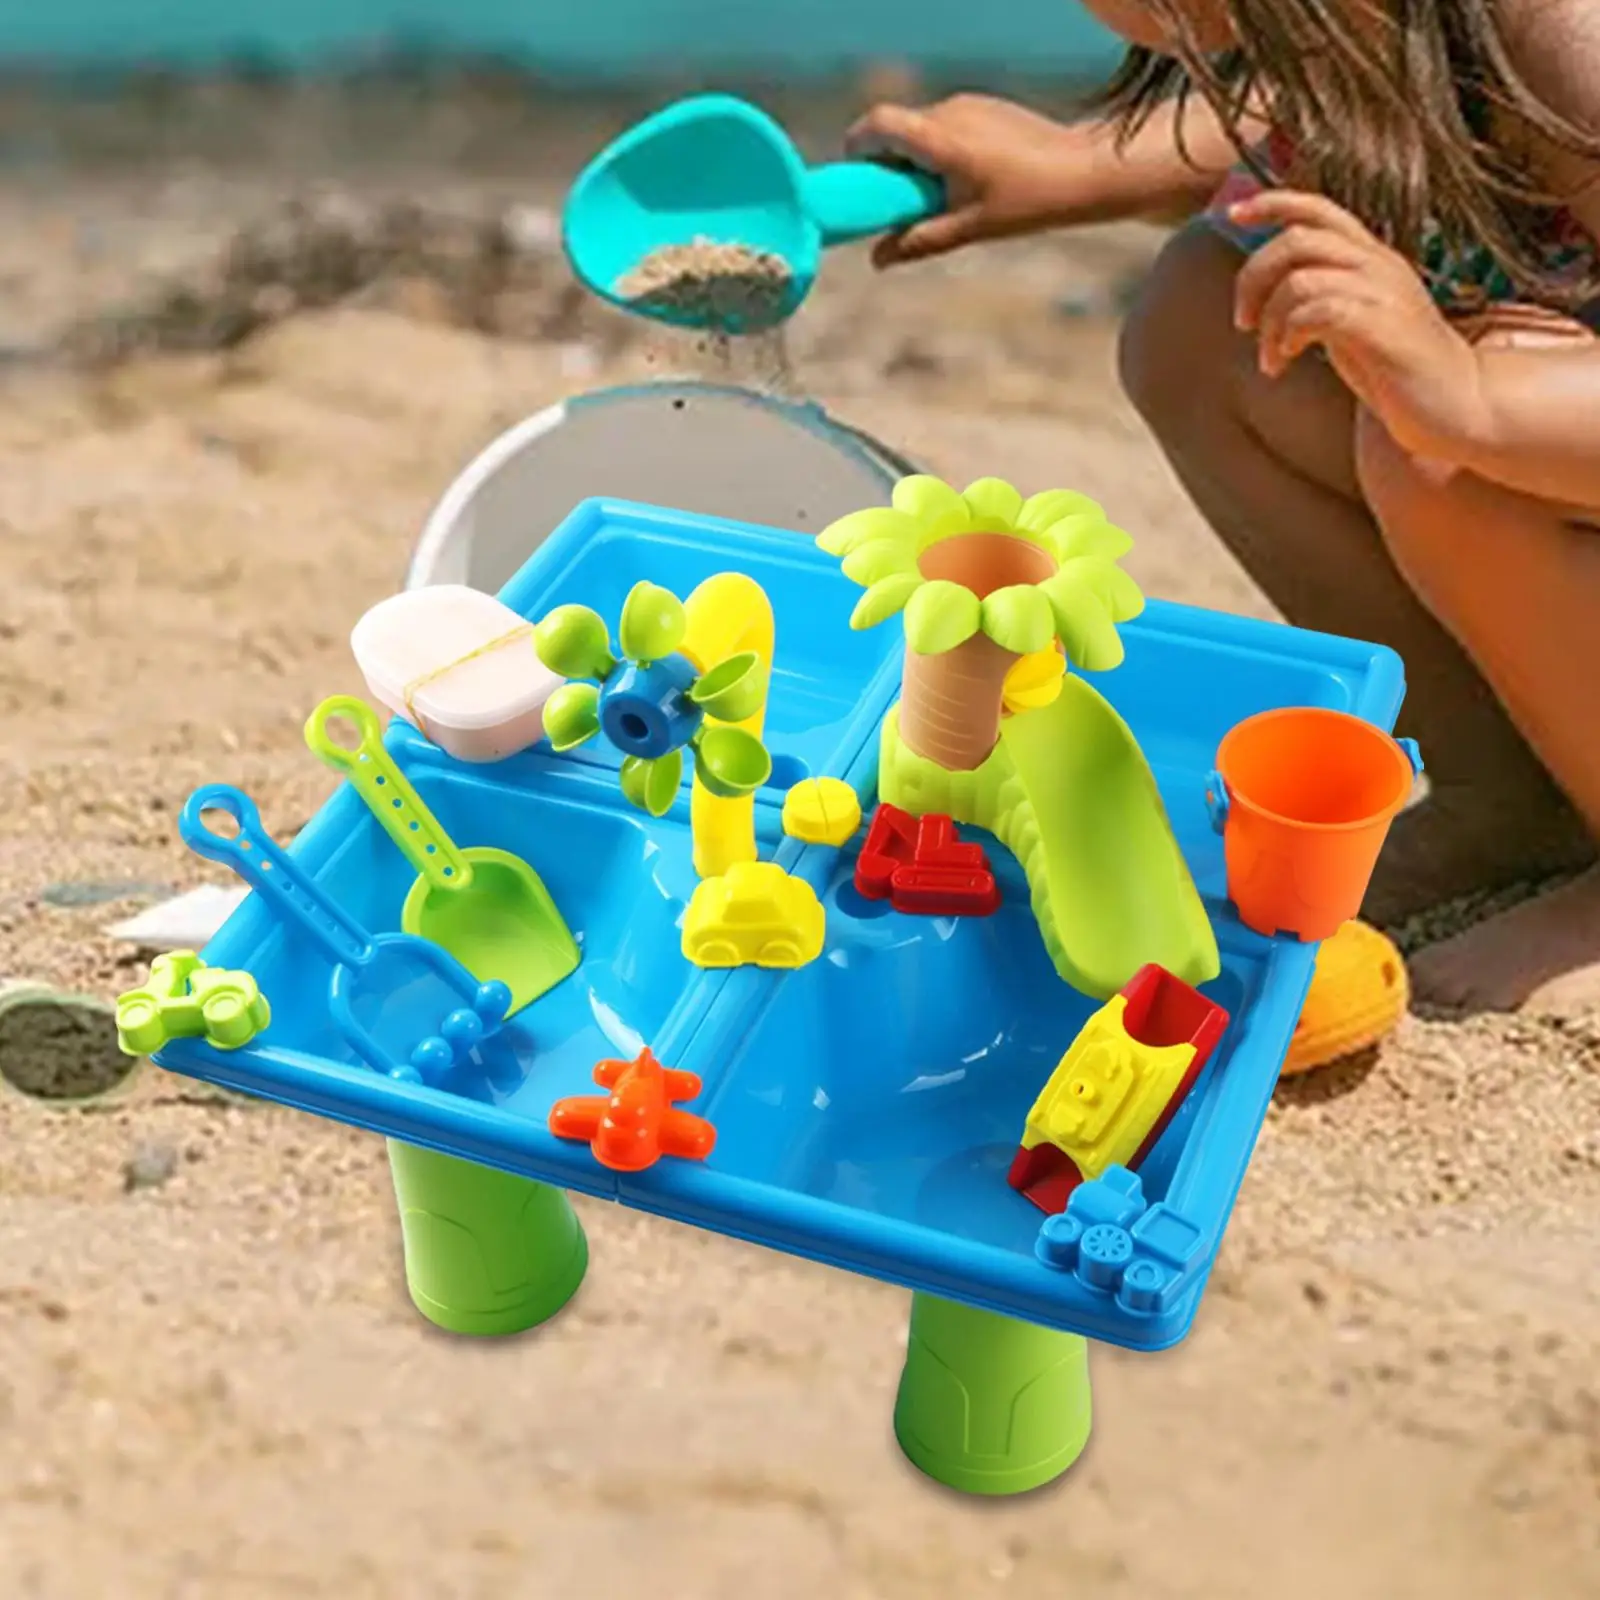 24 Pieces Summer Water Table Sensory Toys Interactive Social Play Sandbox Table Playset for Kids Girls Boys Birthday Gifts